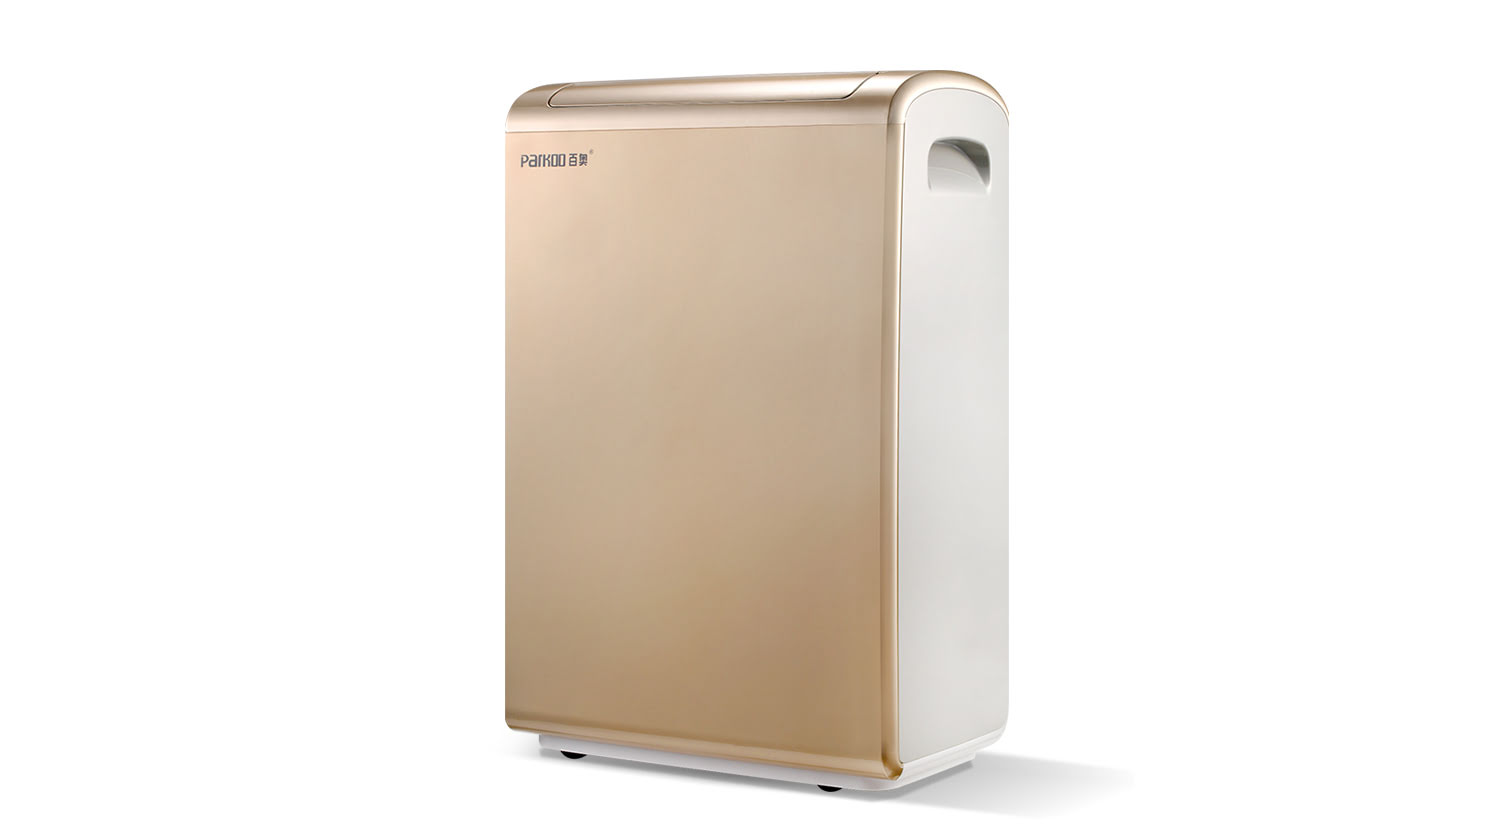 Perfect solution for wet air: removable compressor dehumidifier